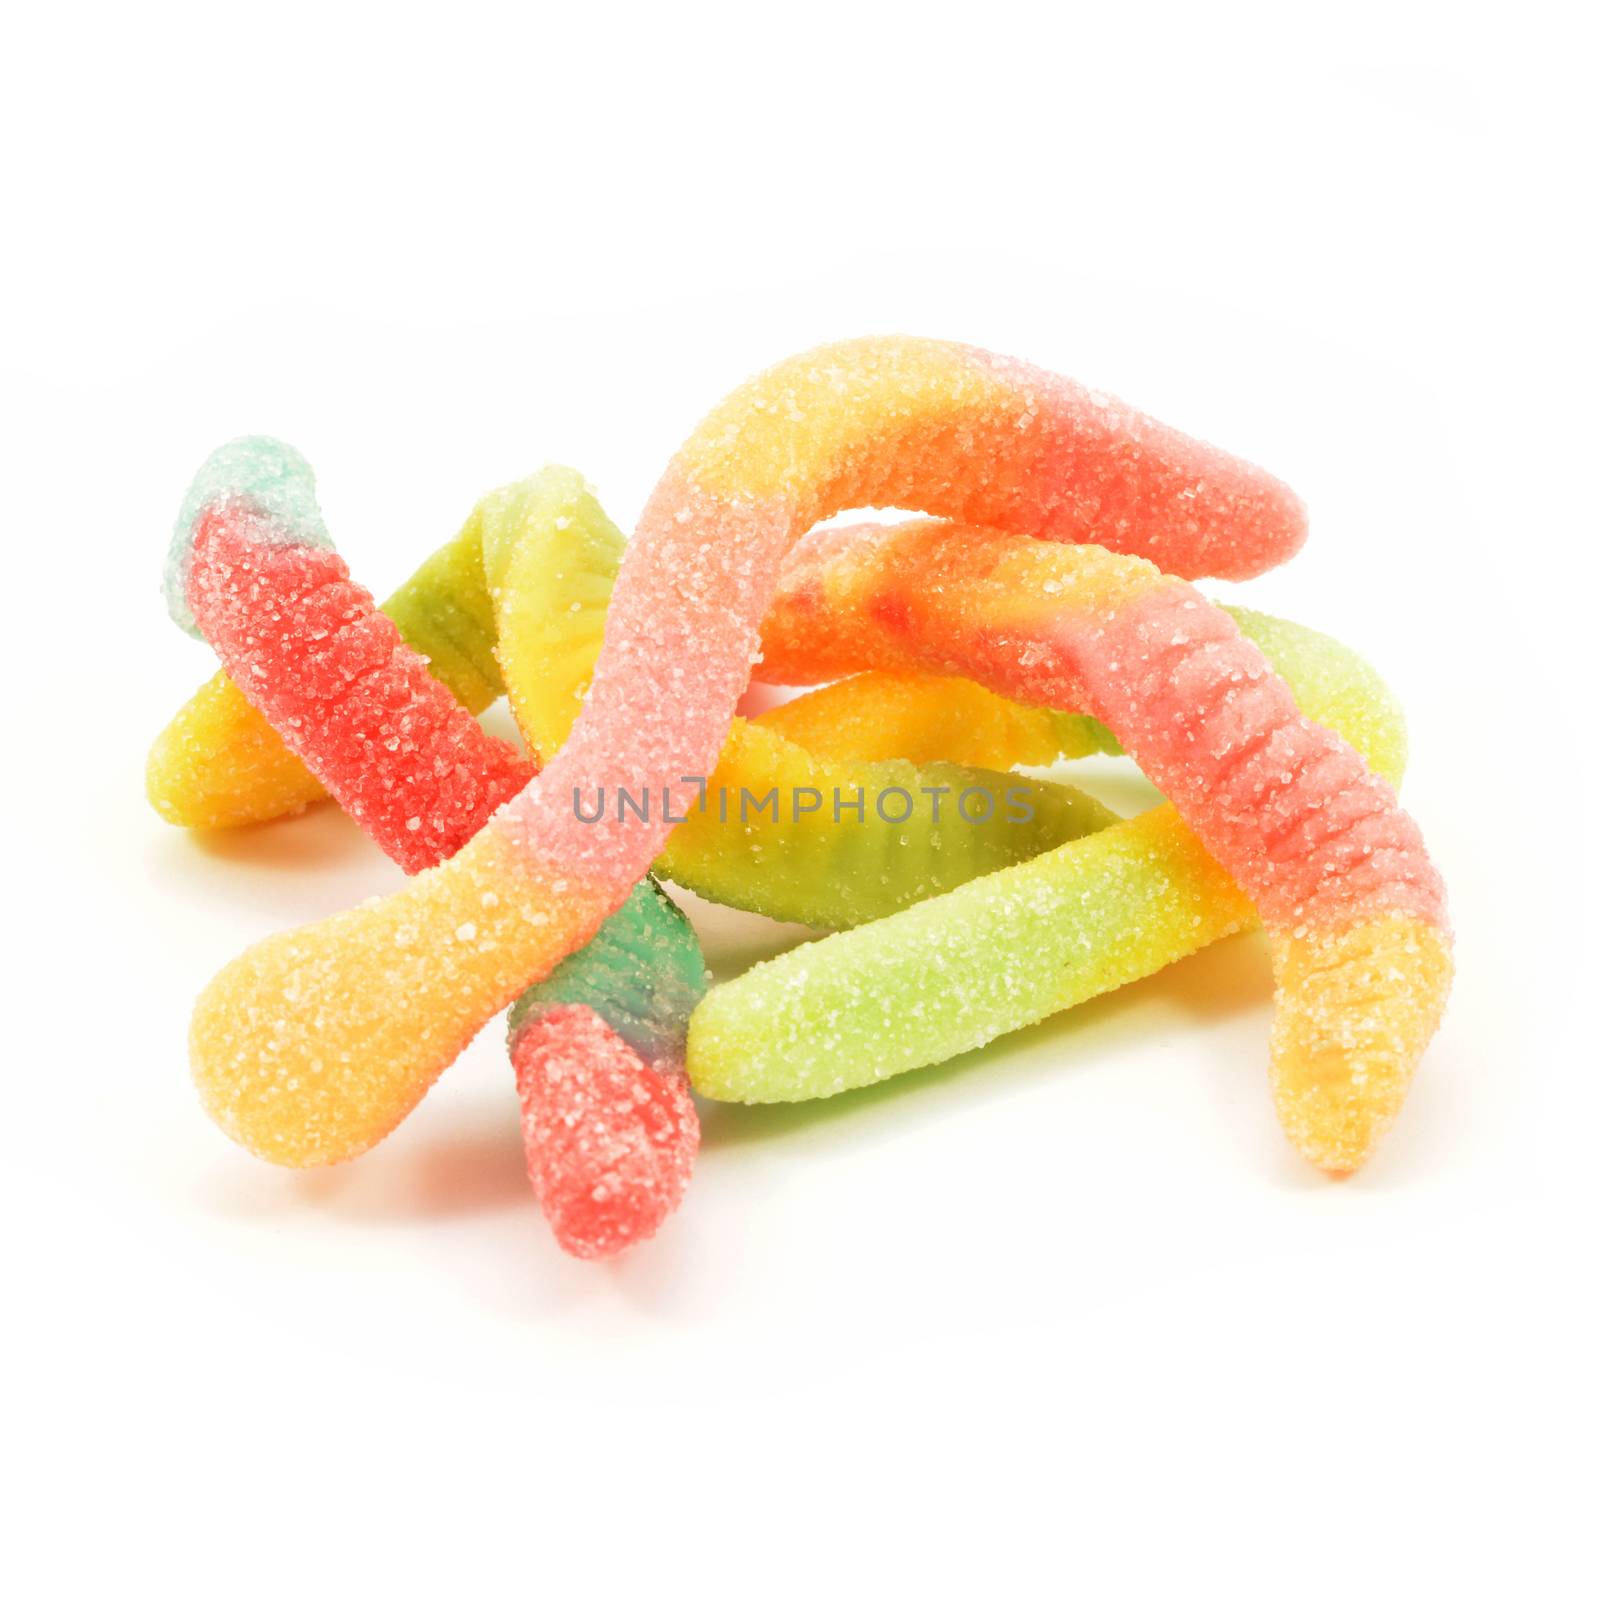 Sour Gummy Worms by AlphaBaby